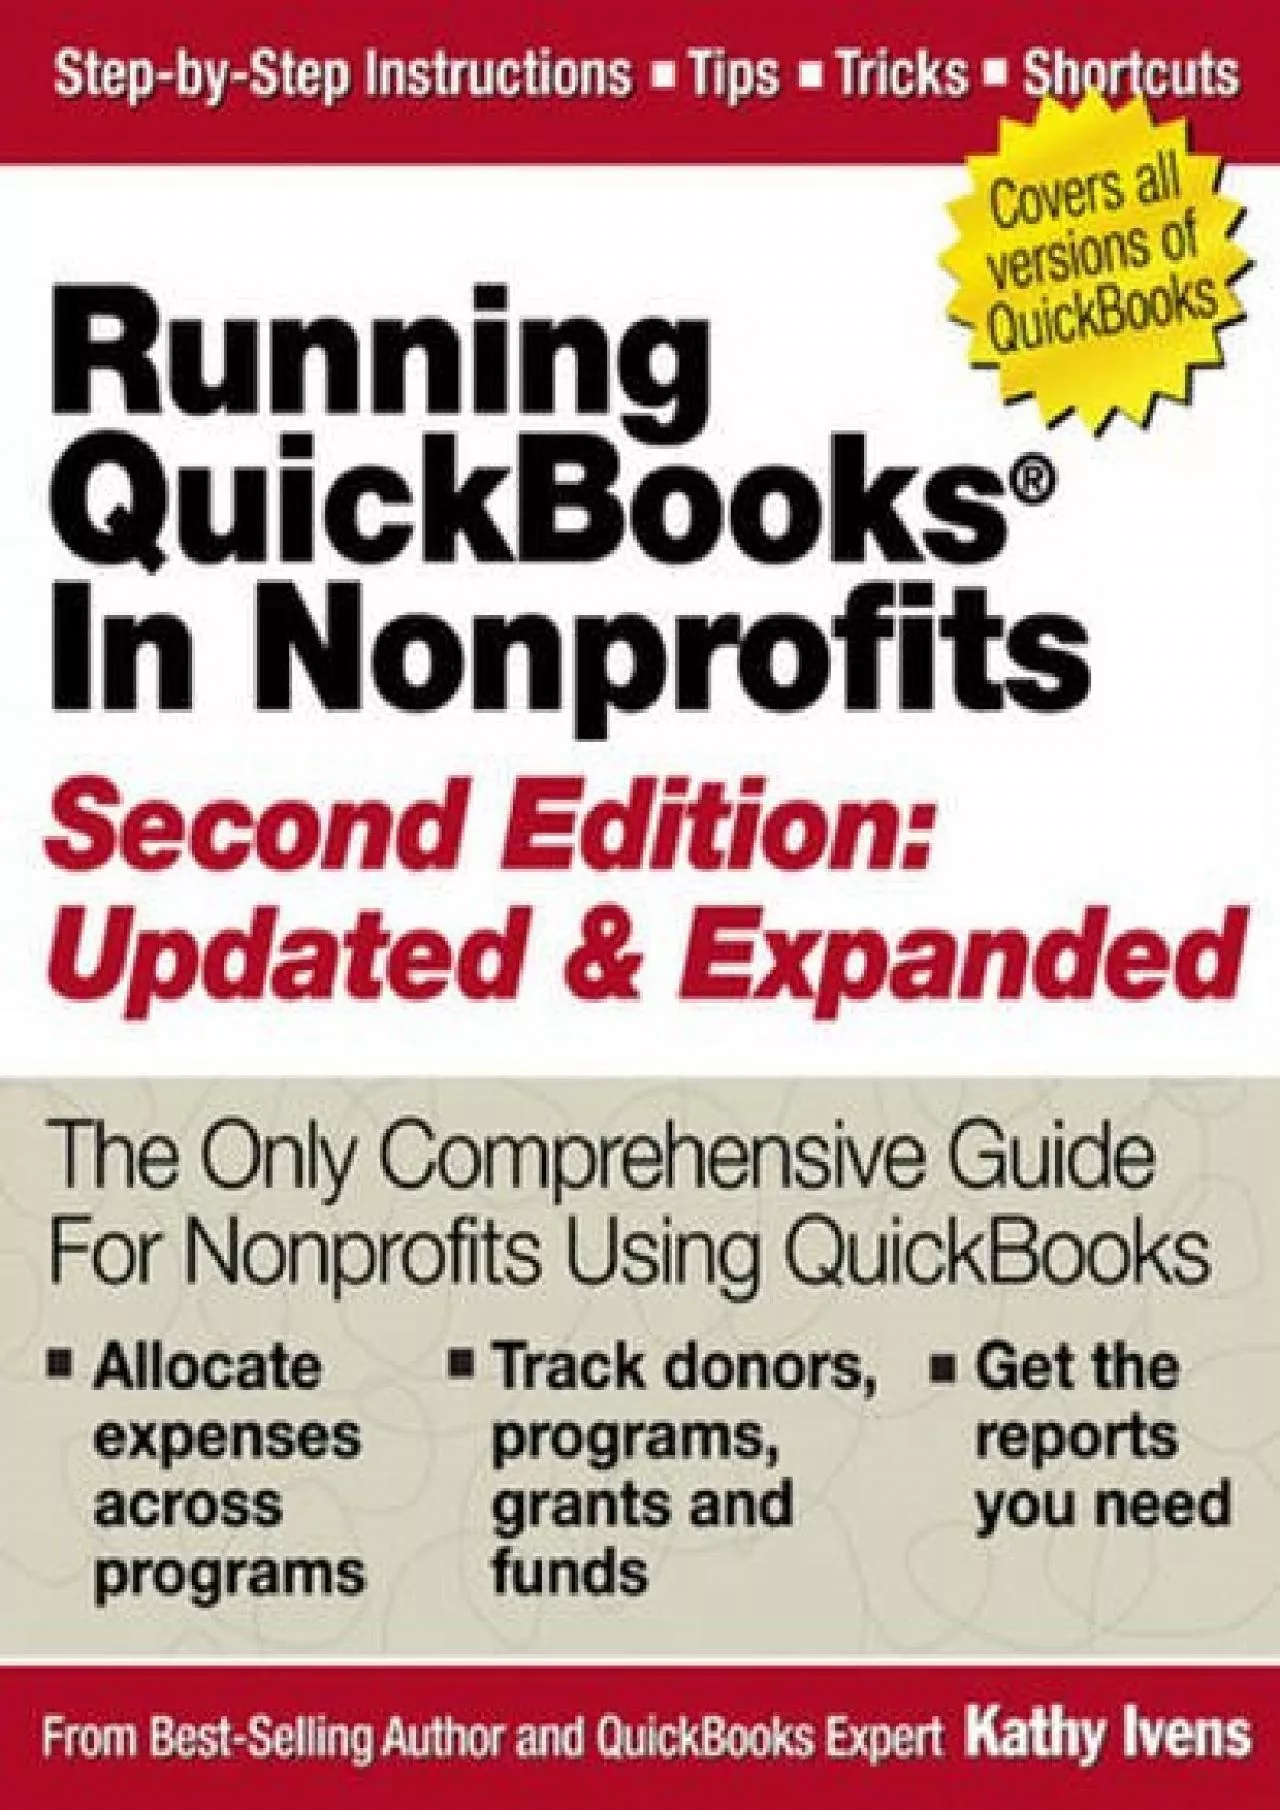 (BOOK)-Running QuickBooks in Nonprofits: 2nd Edition: The Only Comprehensive Guide for